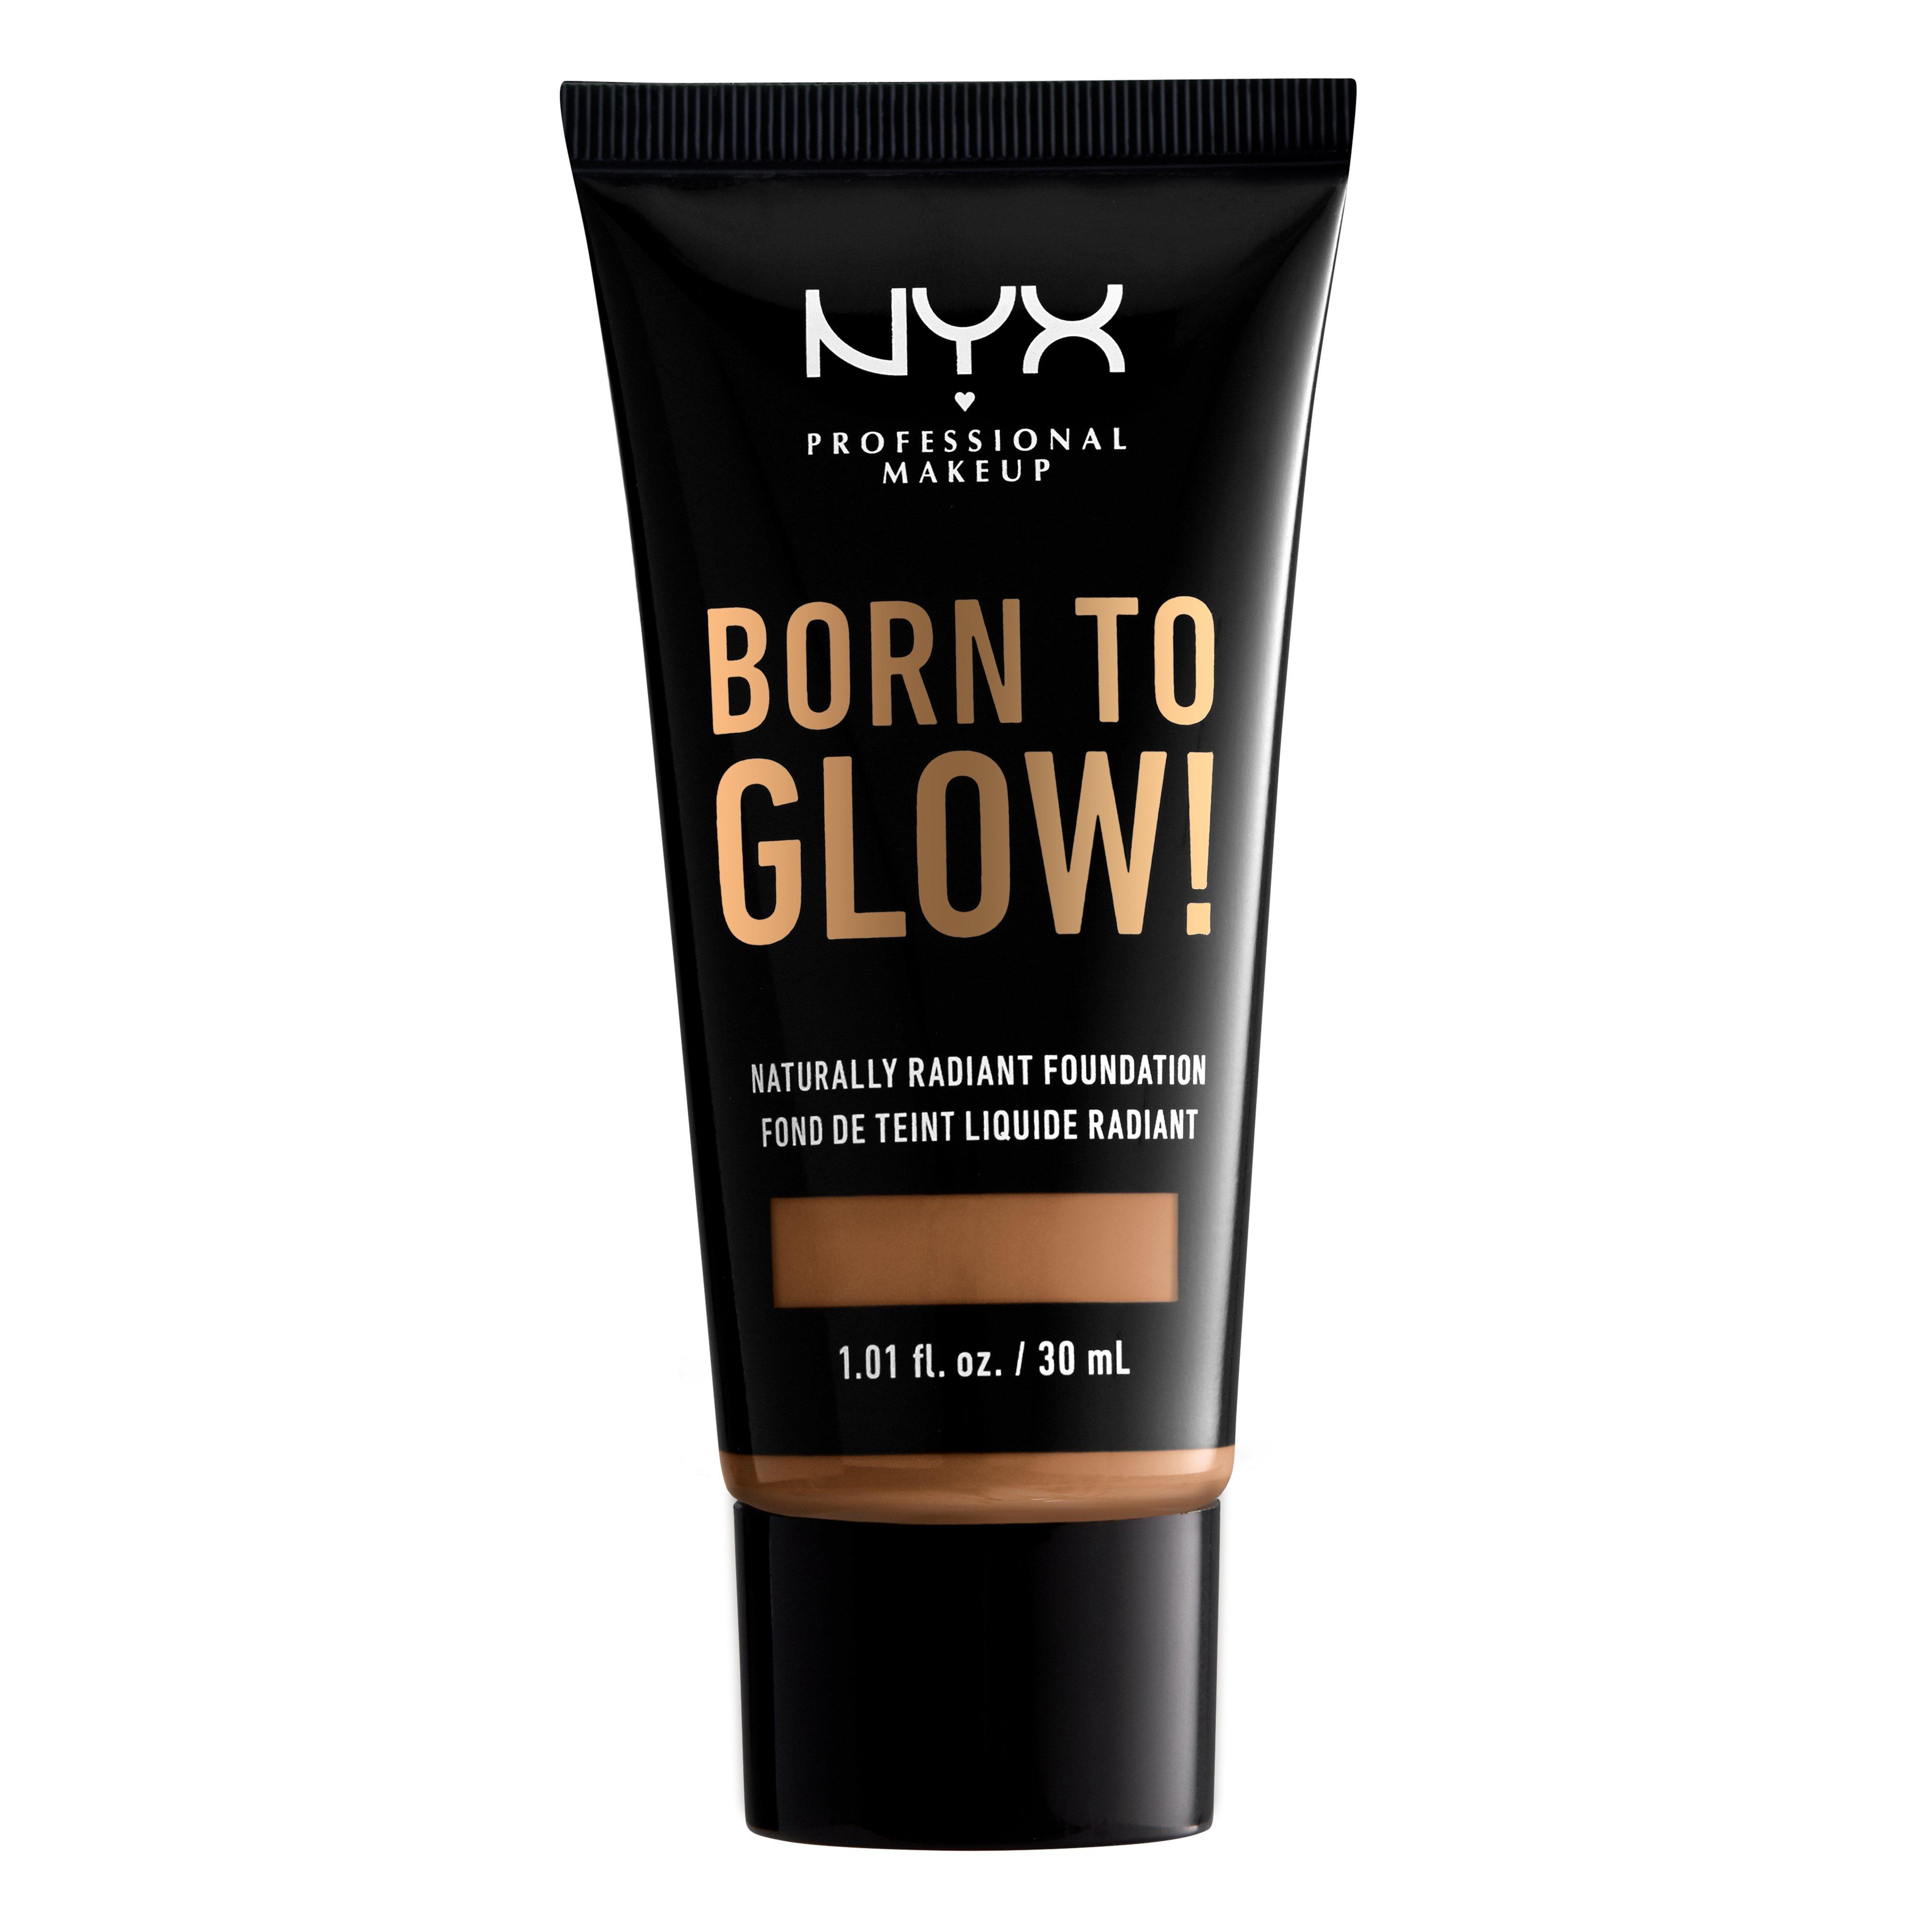 Image of NYX-PROFESSIONAL-MAKEUP Born To Glow Born To Glow Naturally Radiant Foundation - 43g